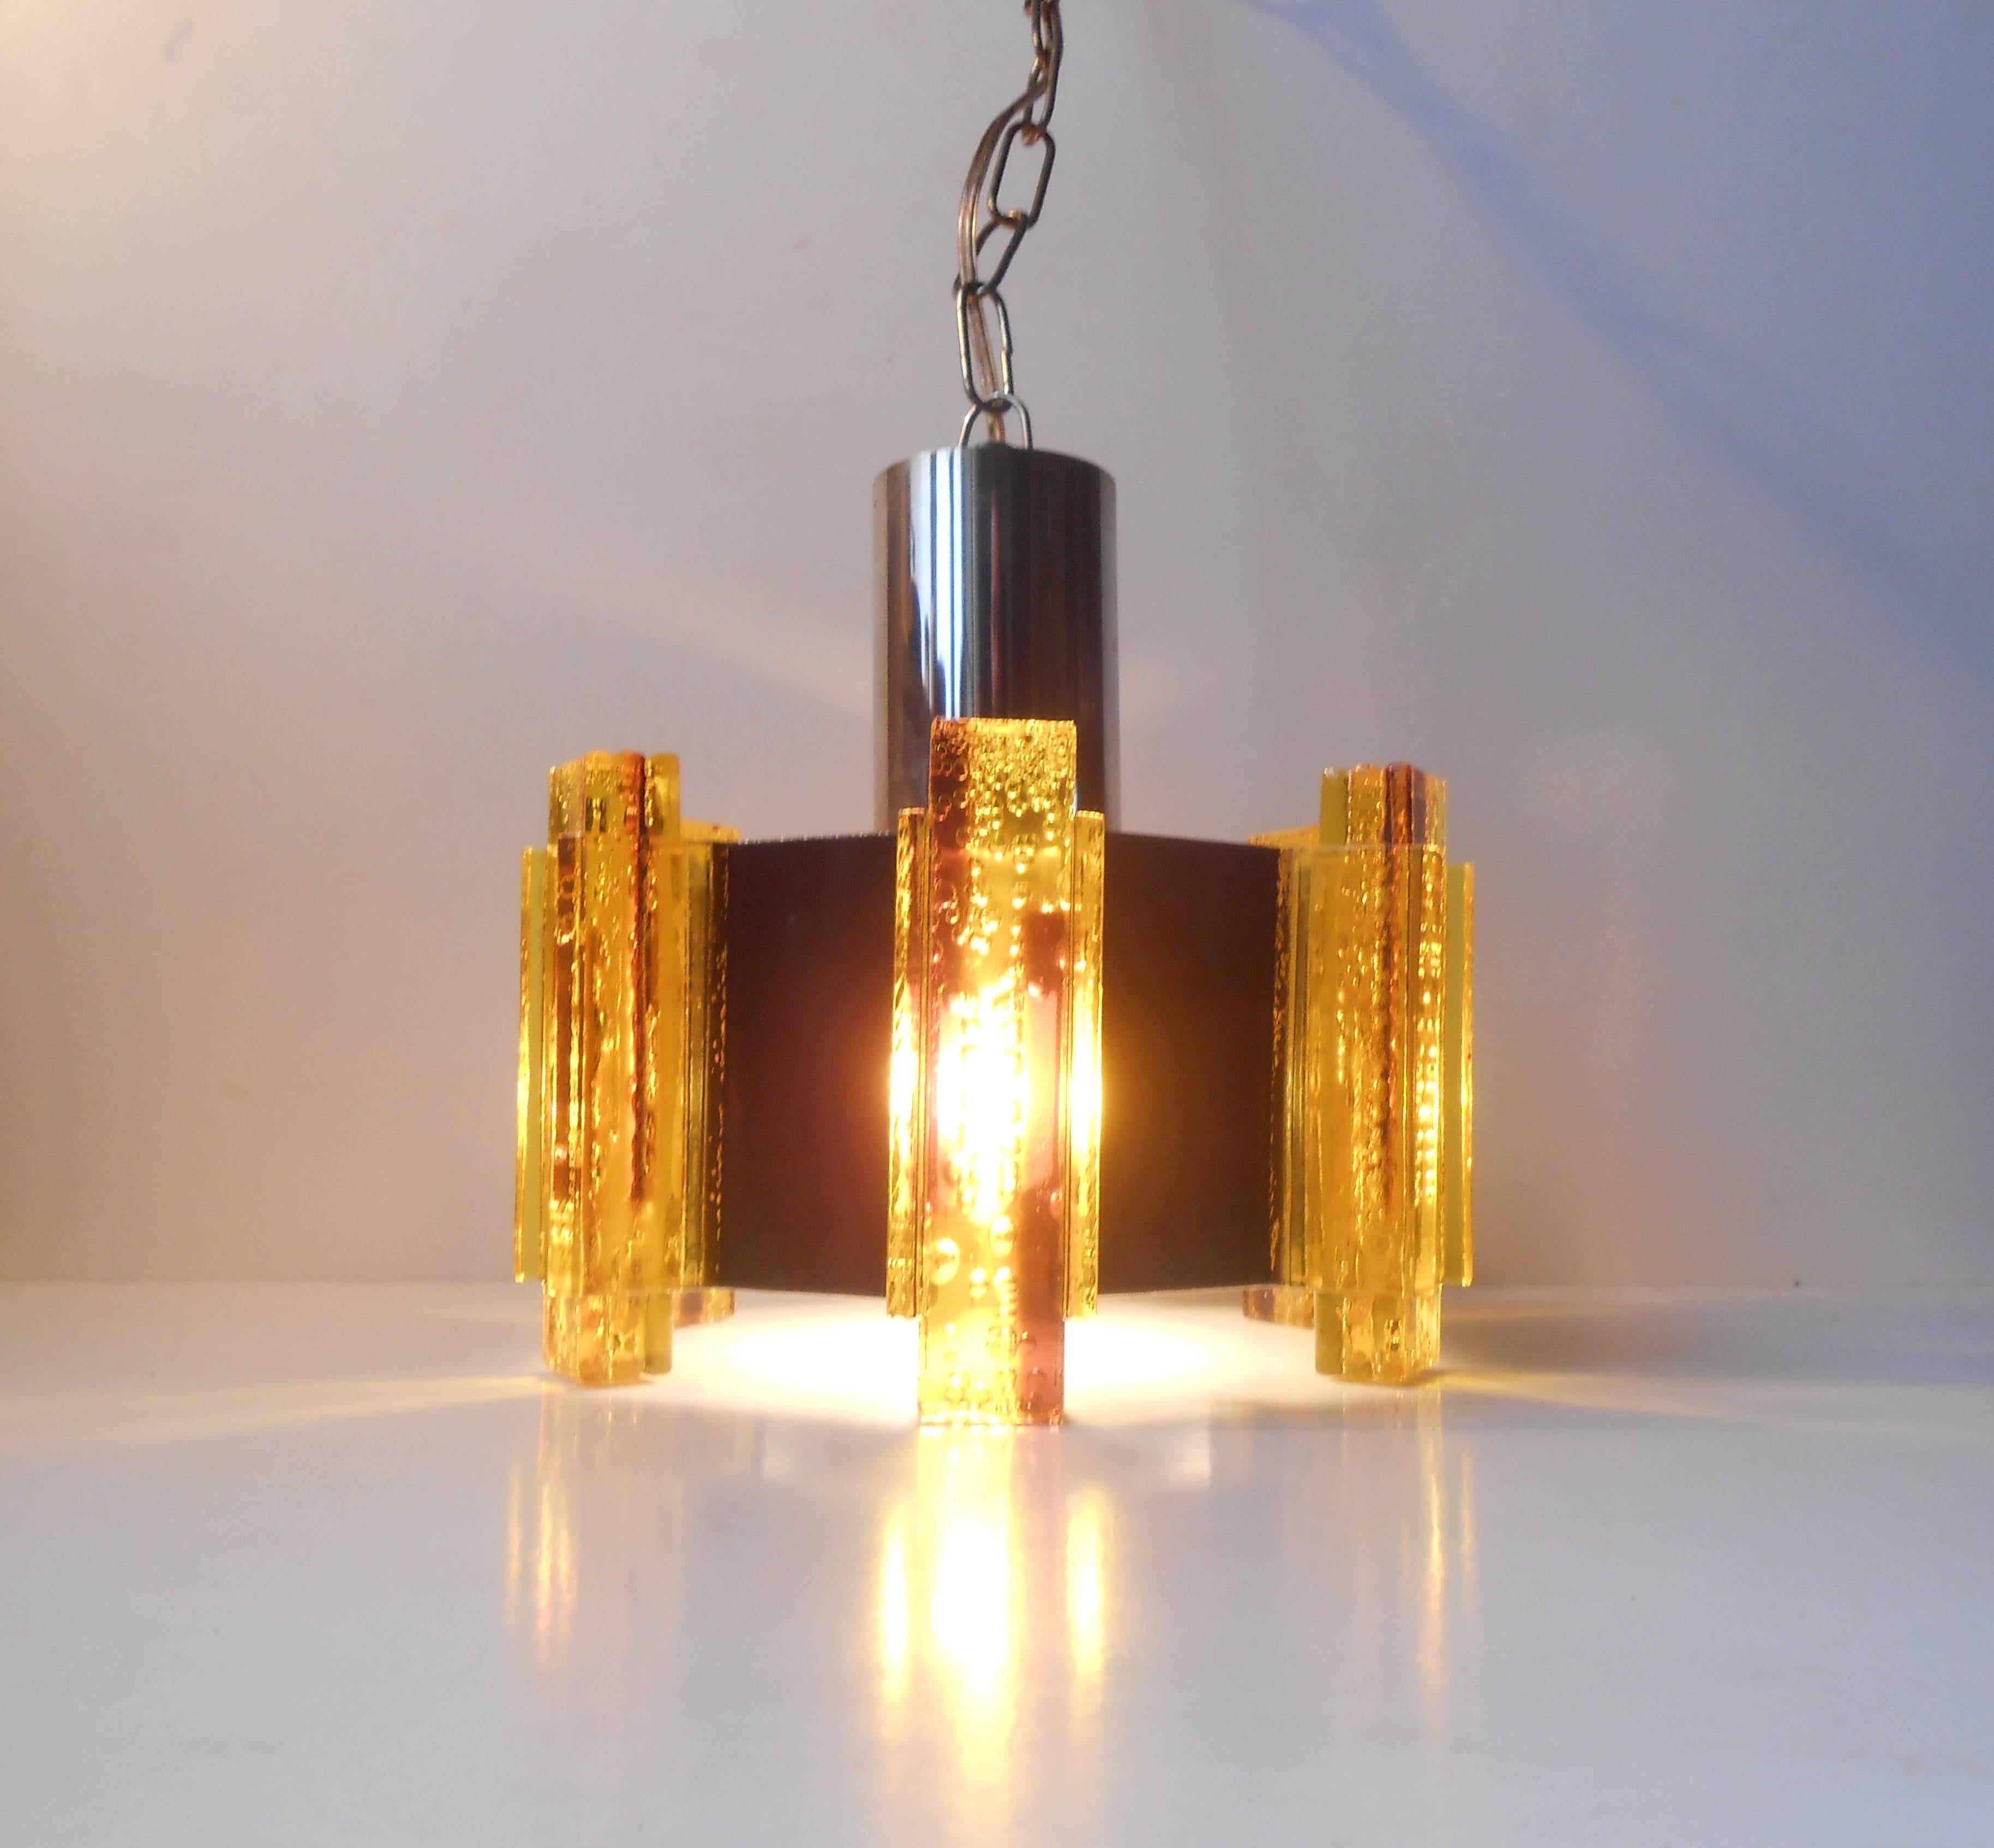 Vintage Claus Bolby Pendant with Brass Details, Danish Modern - a Spacey Twist 1